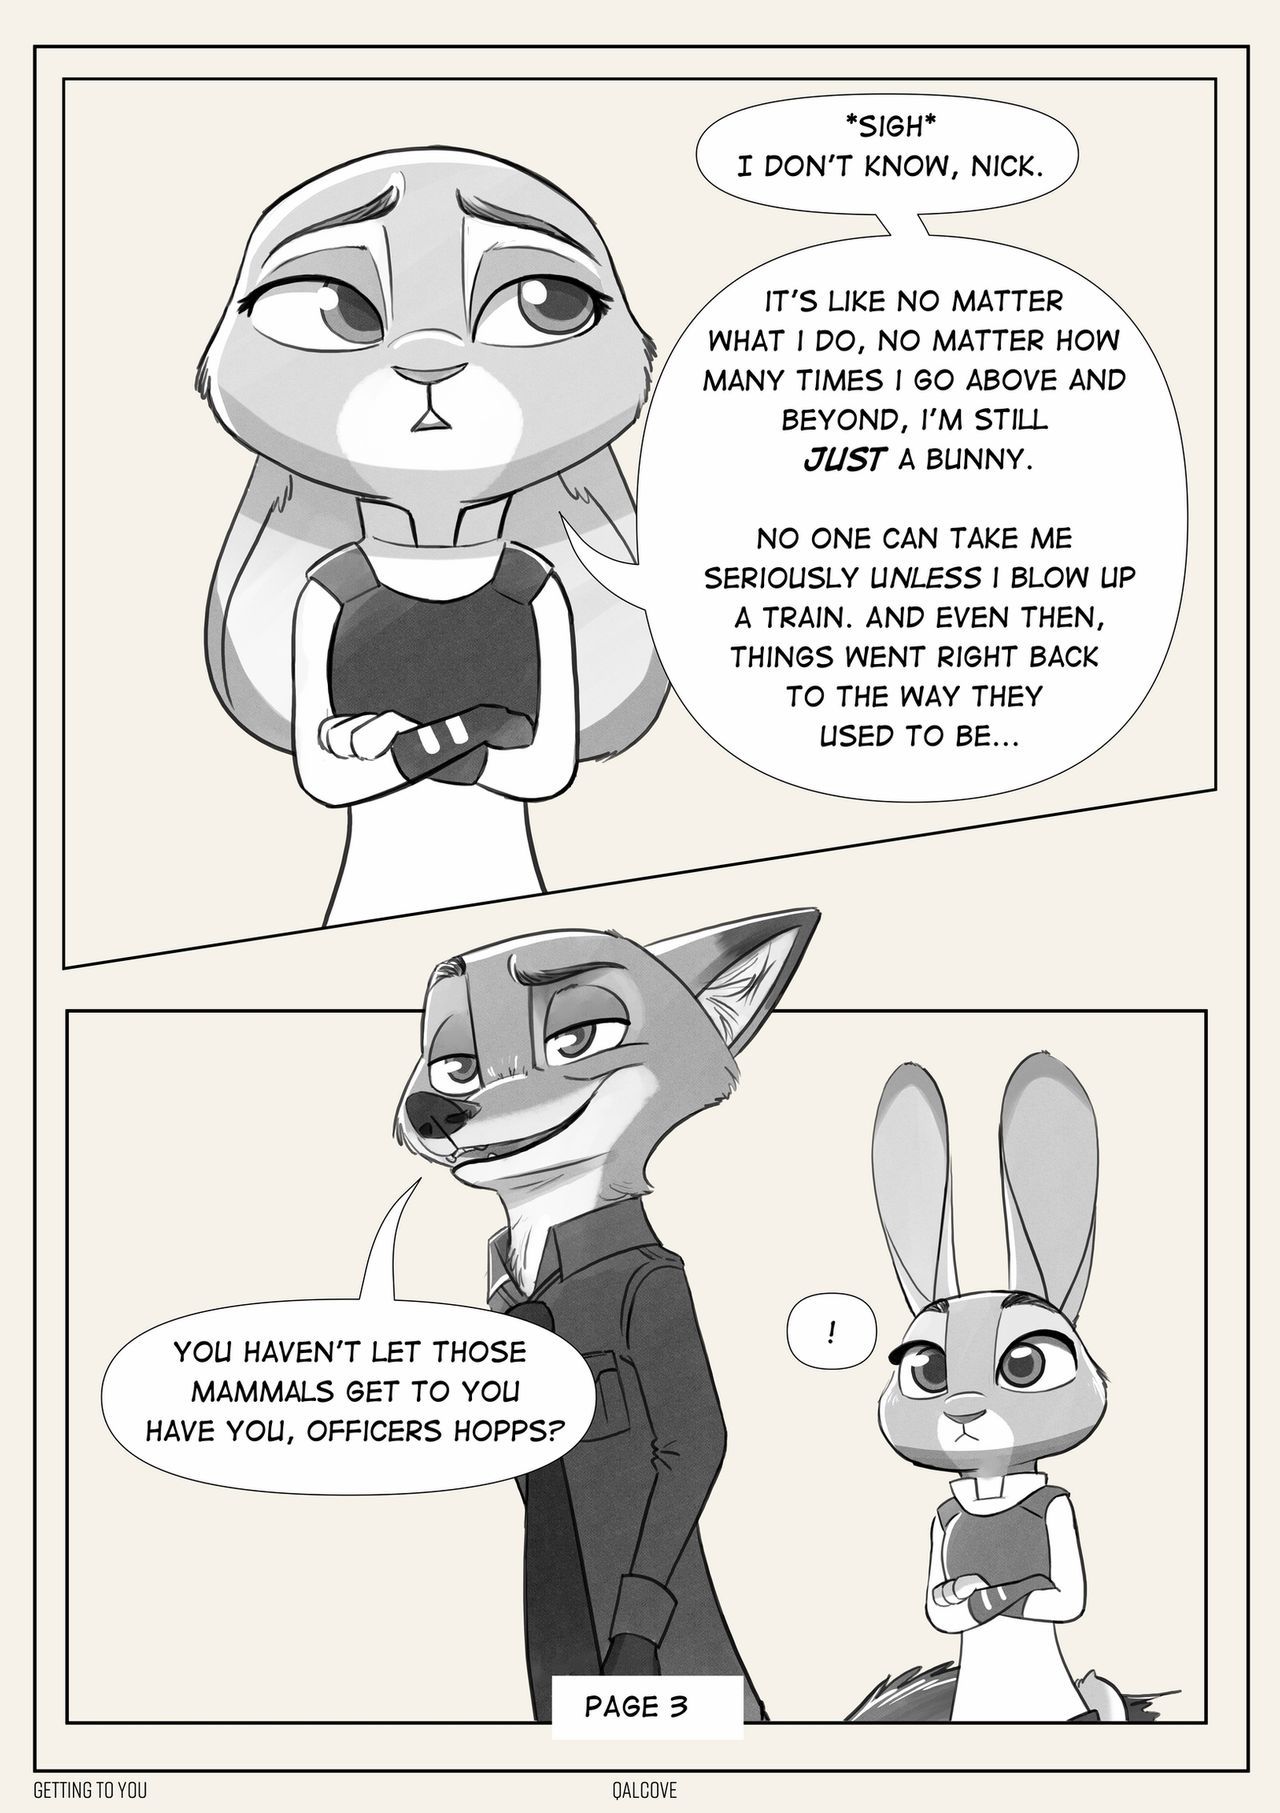 [Qalcove] Getting To You (Zootopia) Ongoing 3